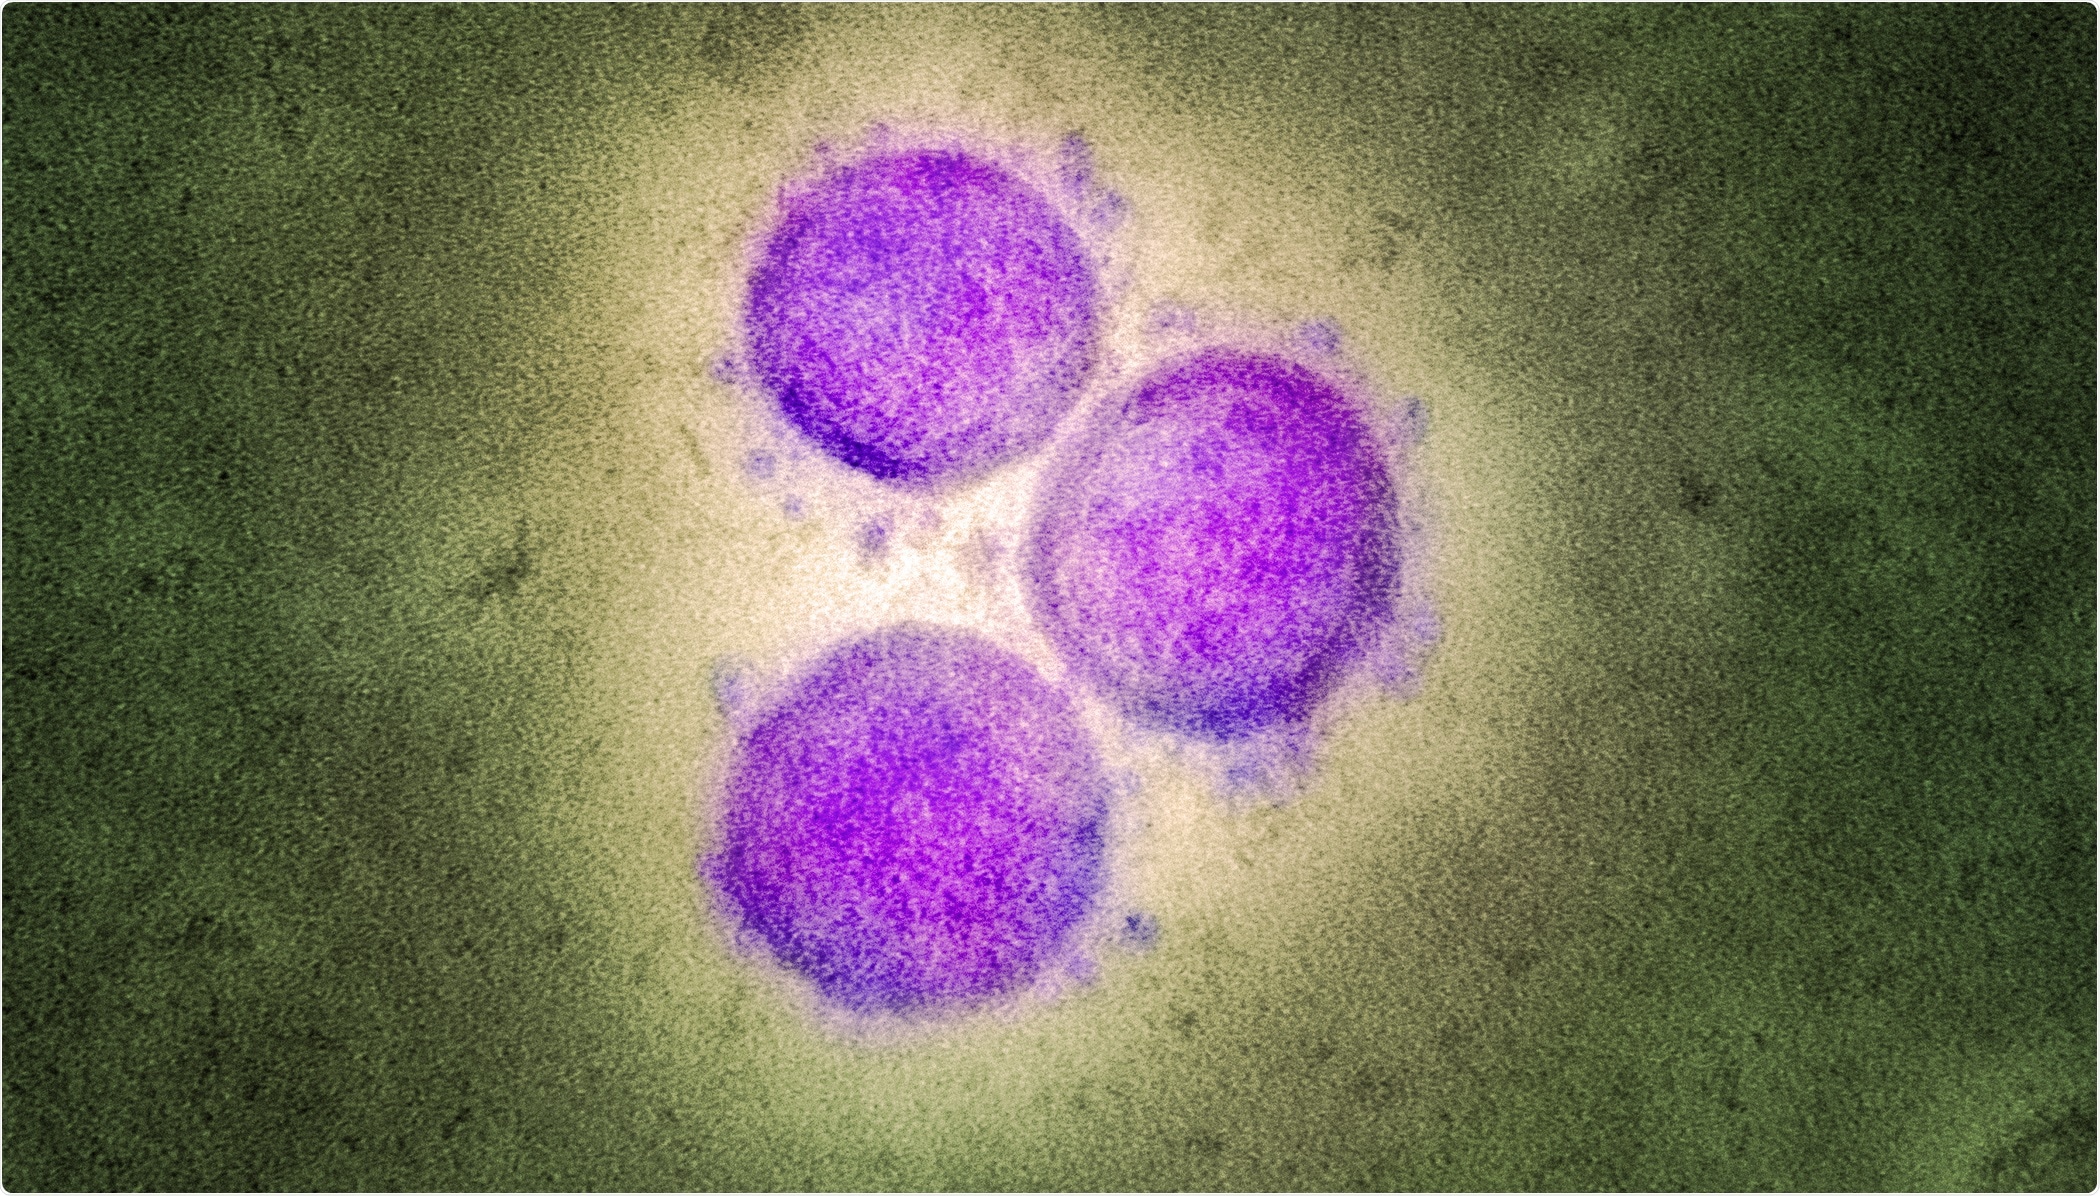 Study: Susceptibility of livestock to SARS-CoV-2 infection. Image Credit: NIAID